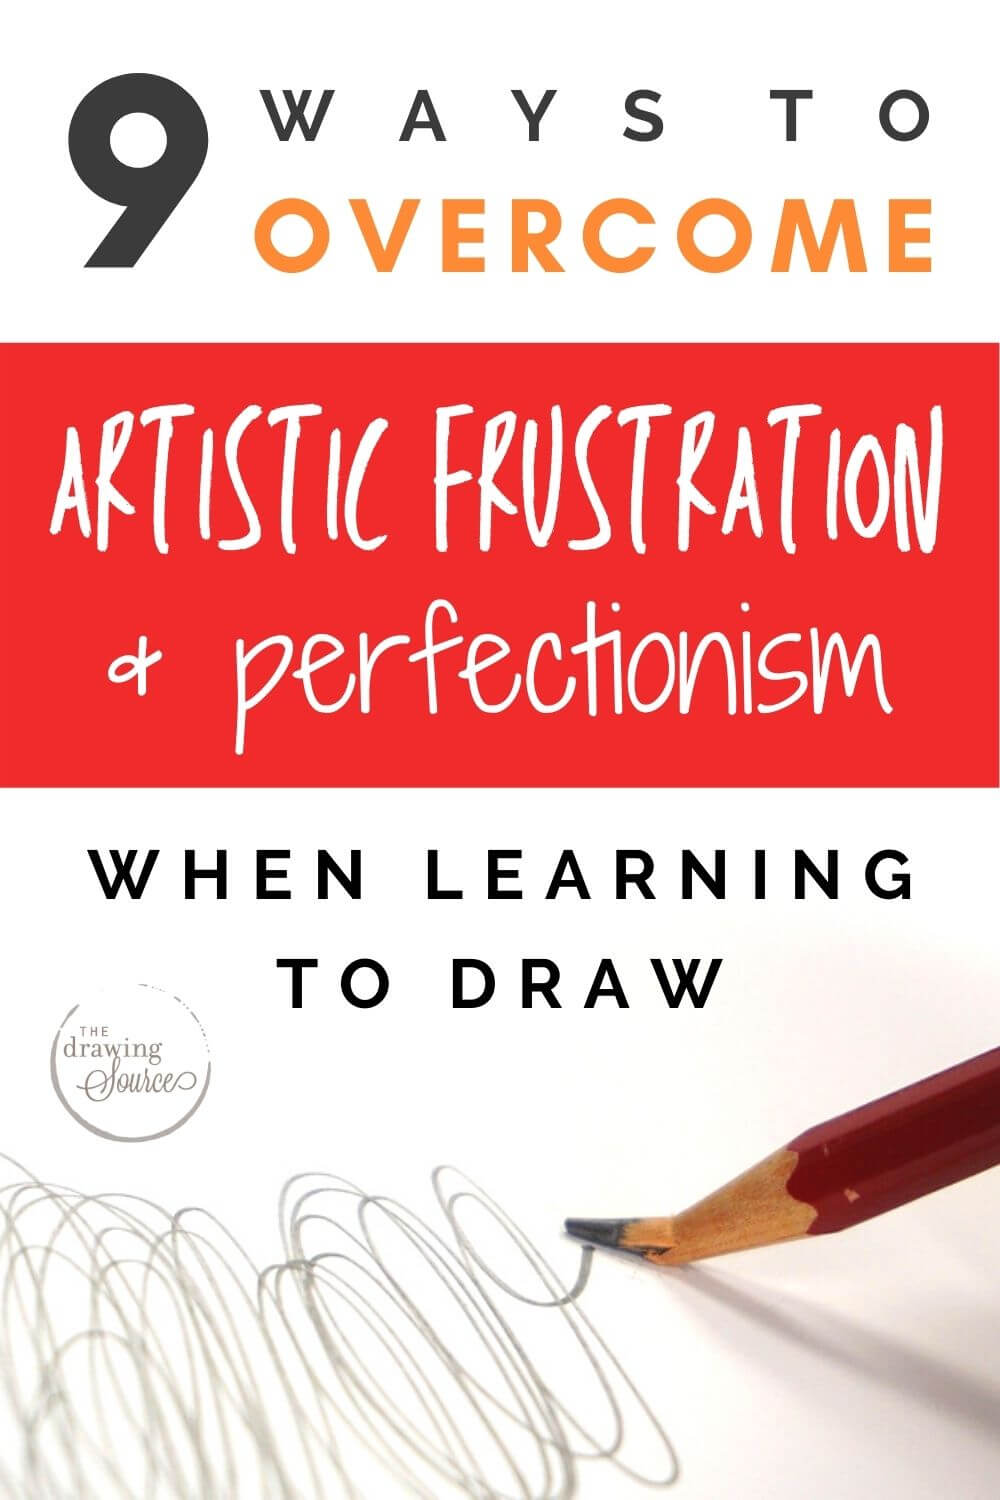 A broken pencil and angry-looking pencil marks with text: 9 ways to overcome artistic frustration and perfectionism when learning to draw